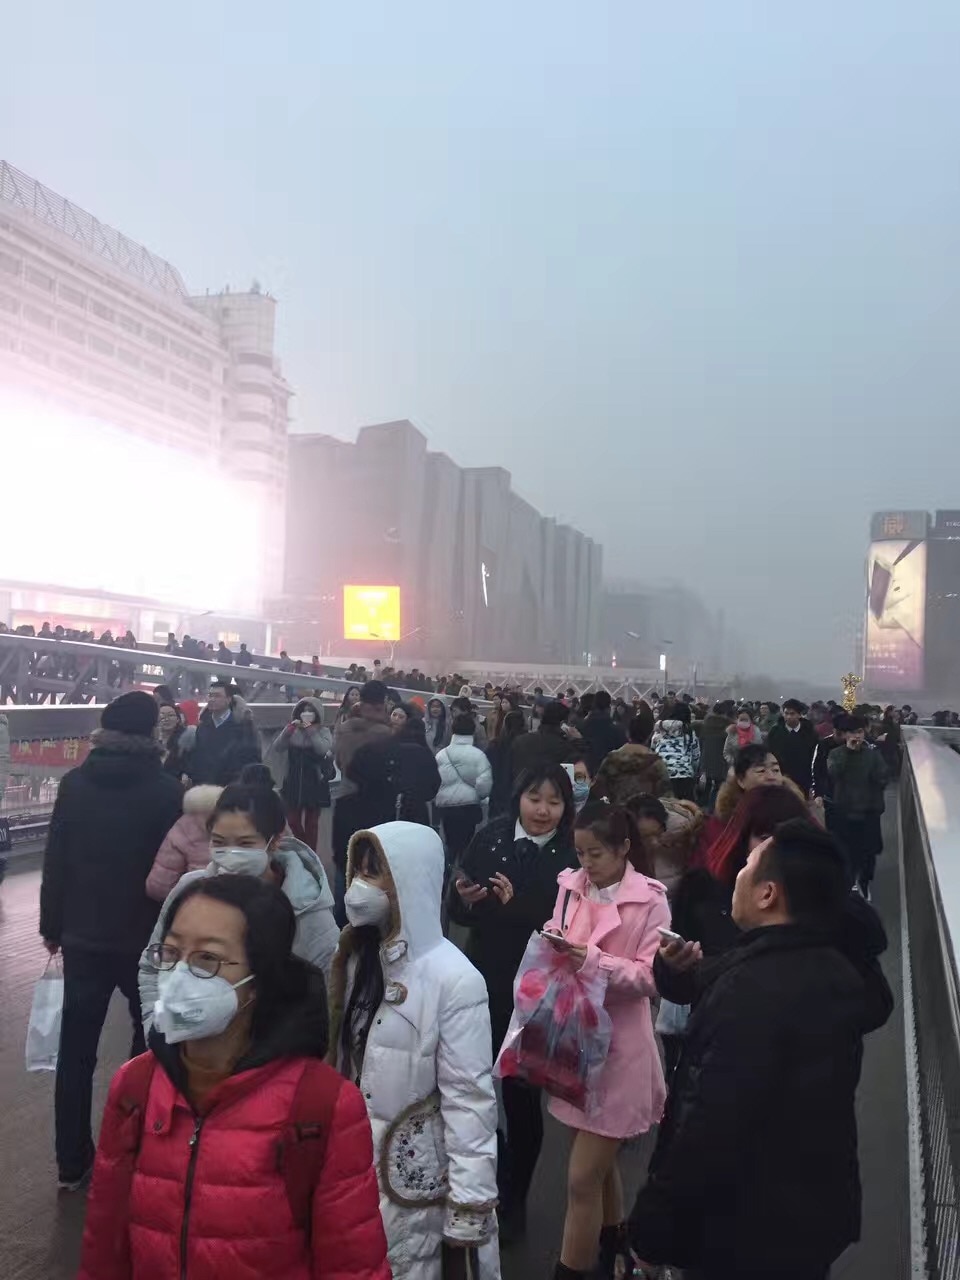 Chinese residents wear face masks to protect themselves from high smog and pollution levels.